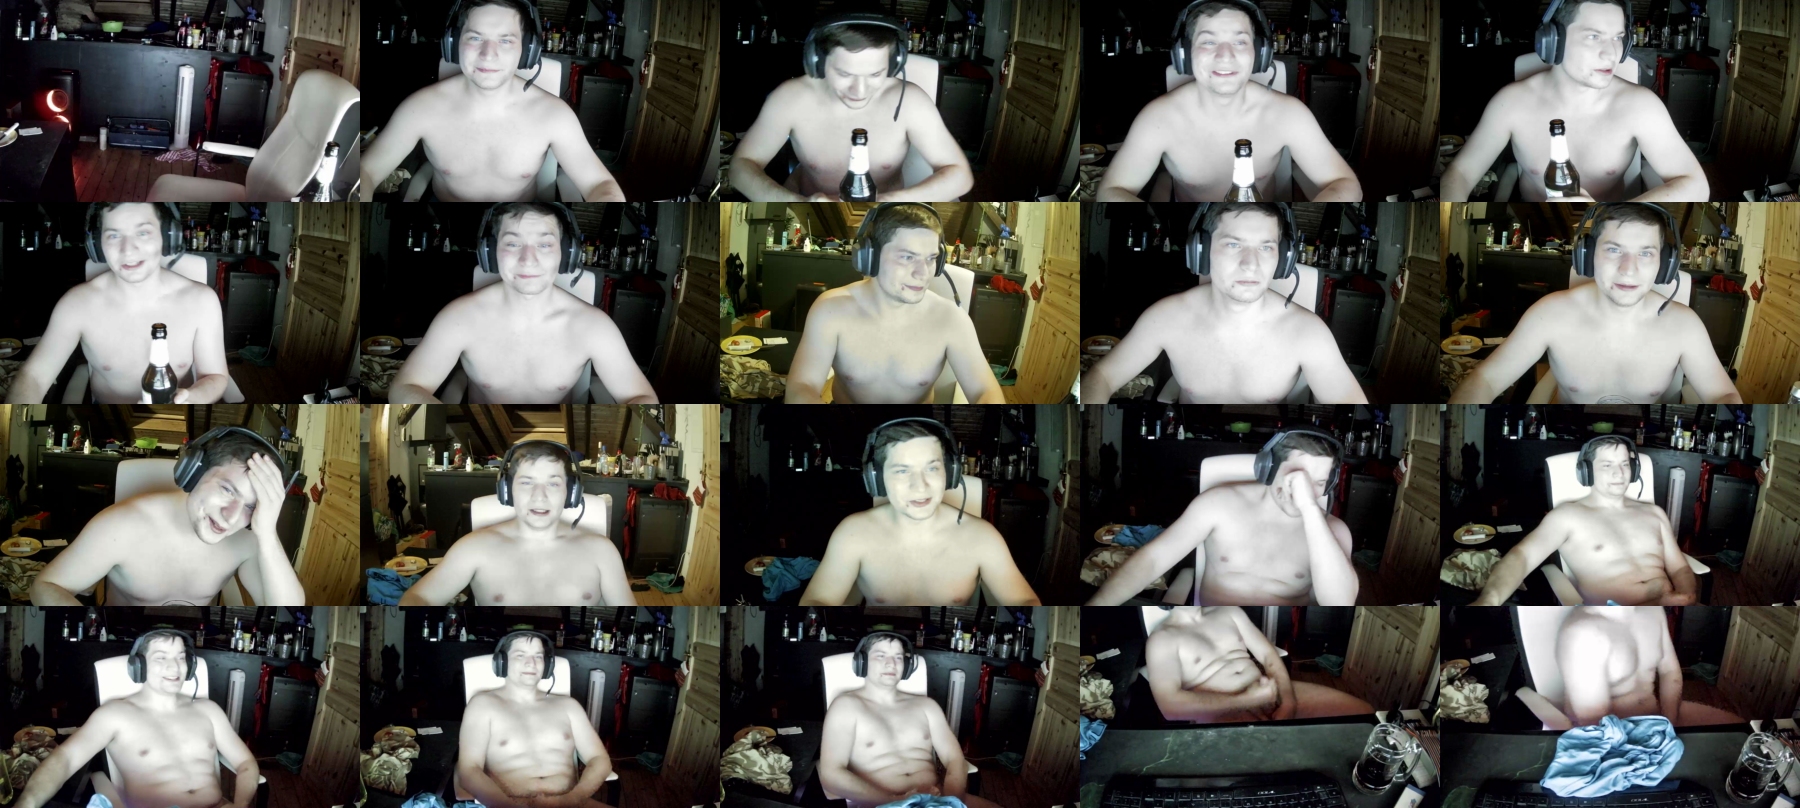 justin958  10-09-2021 Recorded Video Webcam